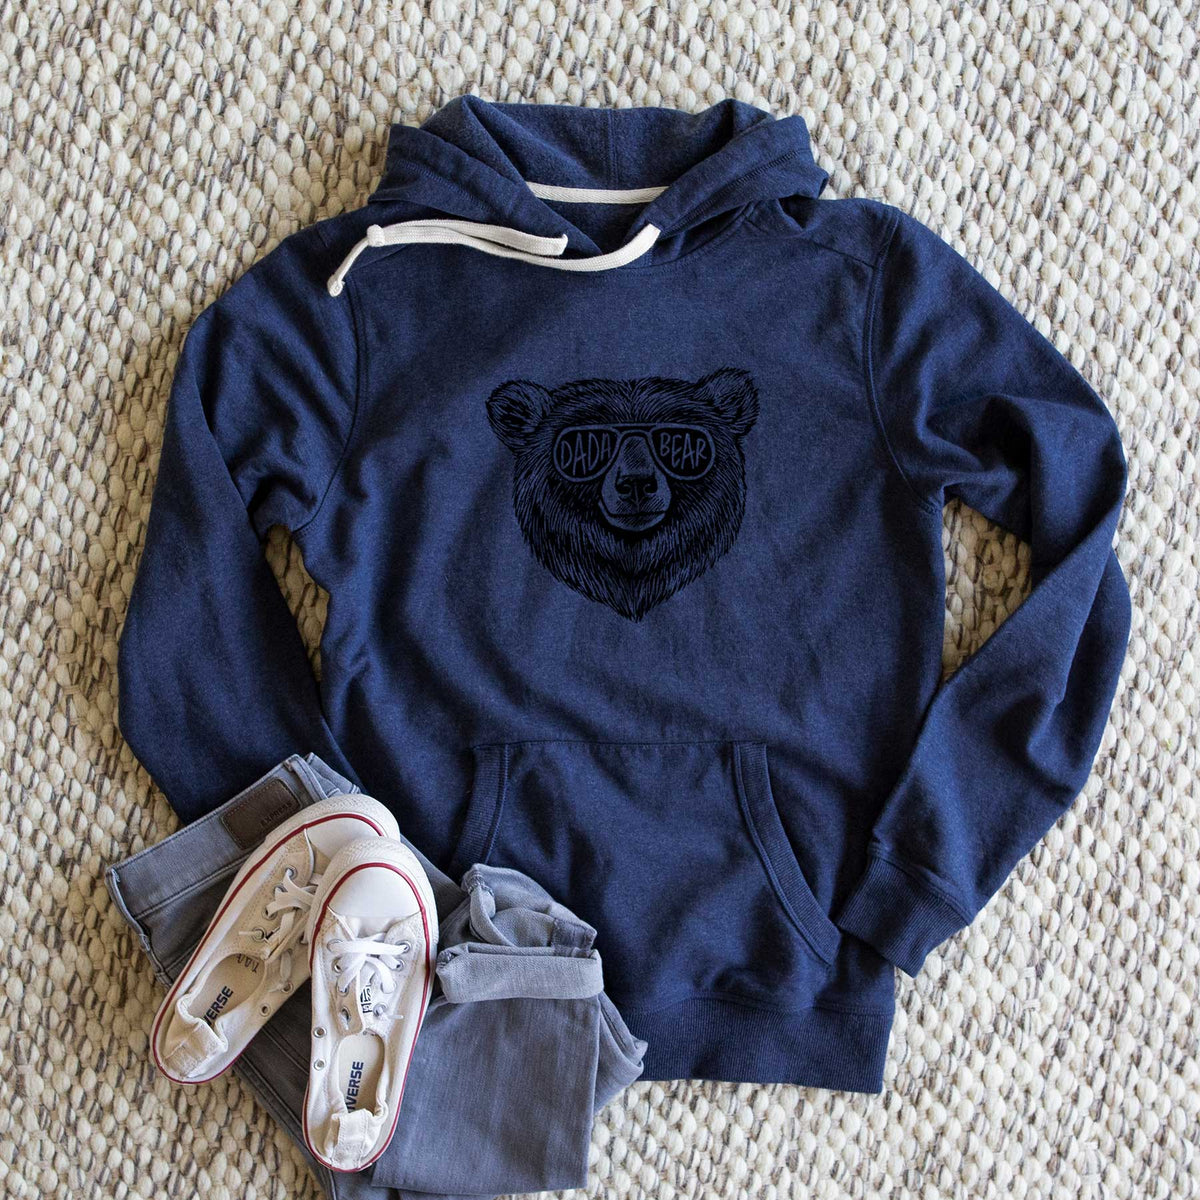 Dada Bear - Unisex Recycled Hoodie - CLOSEOUT - FINAL SALE